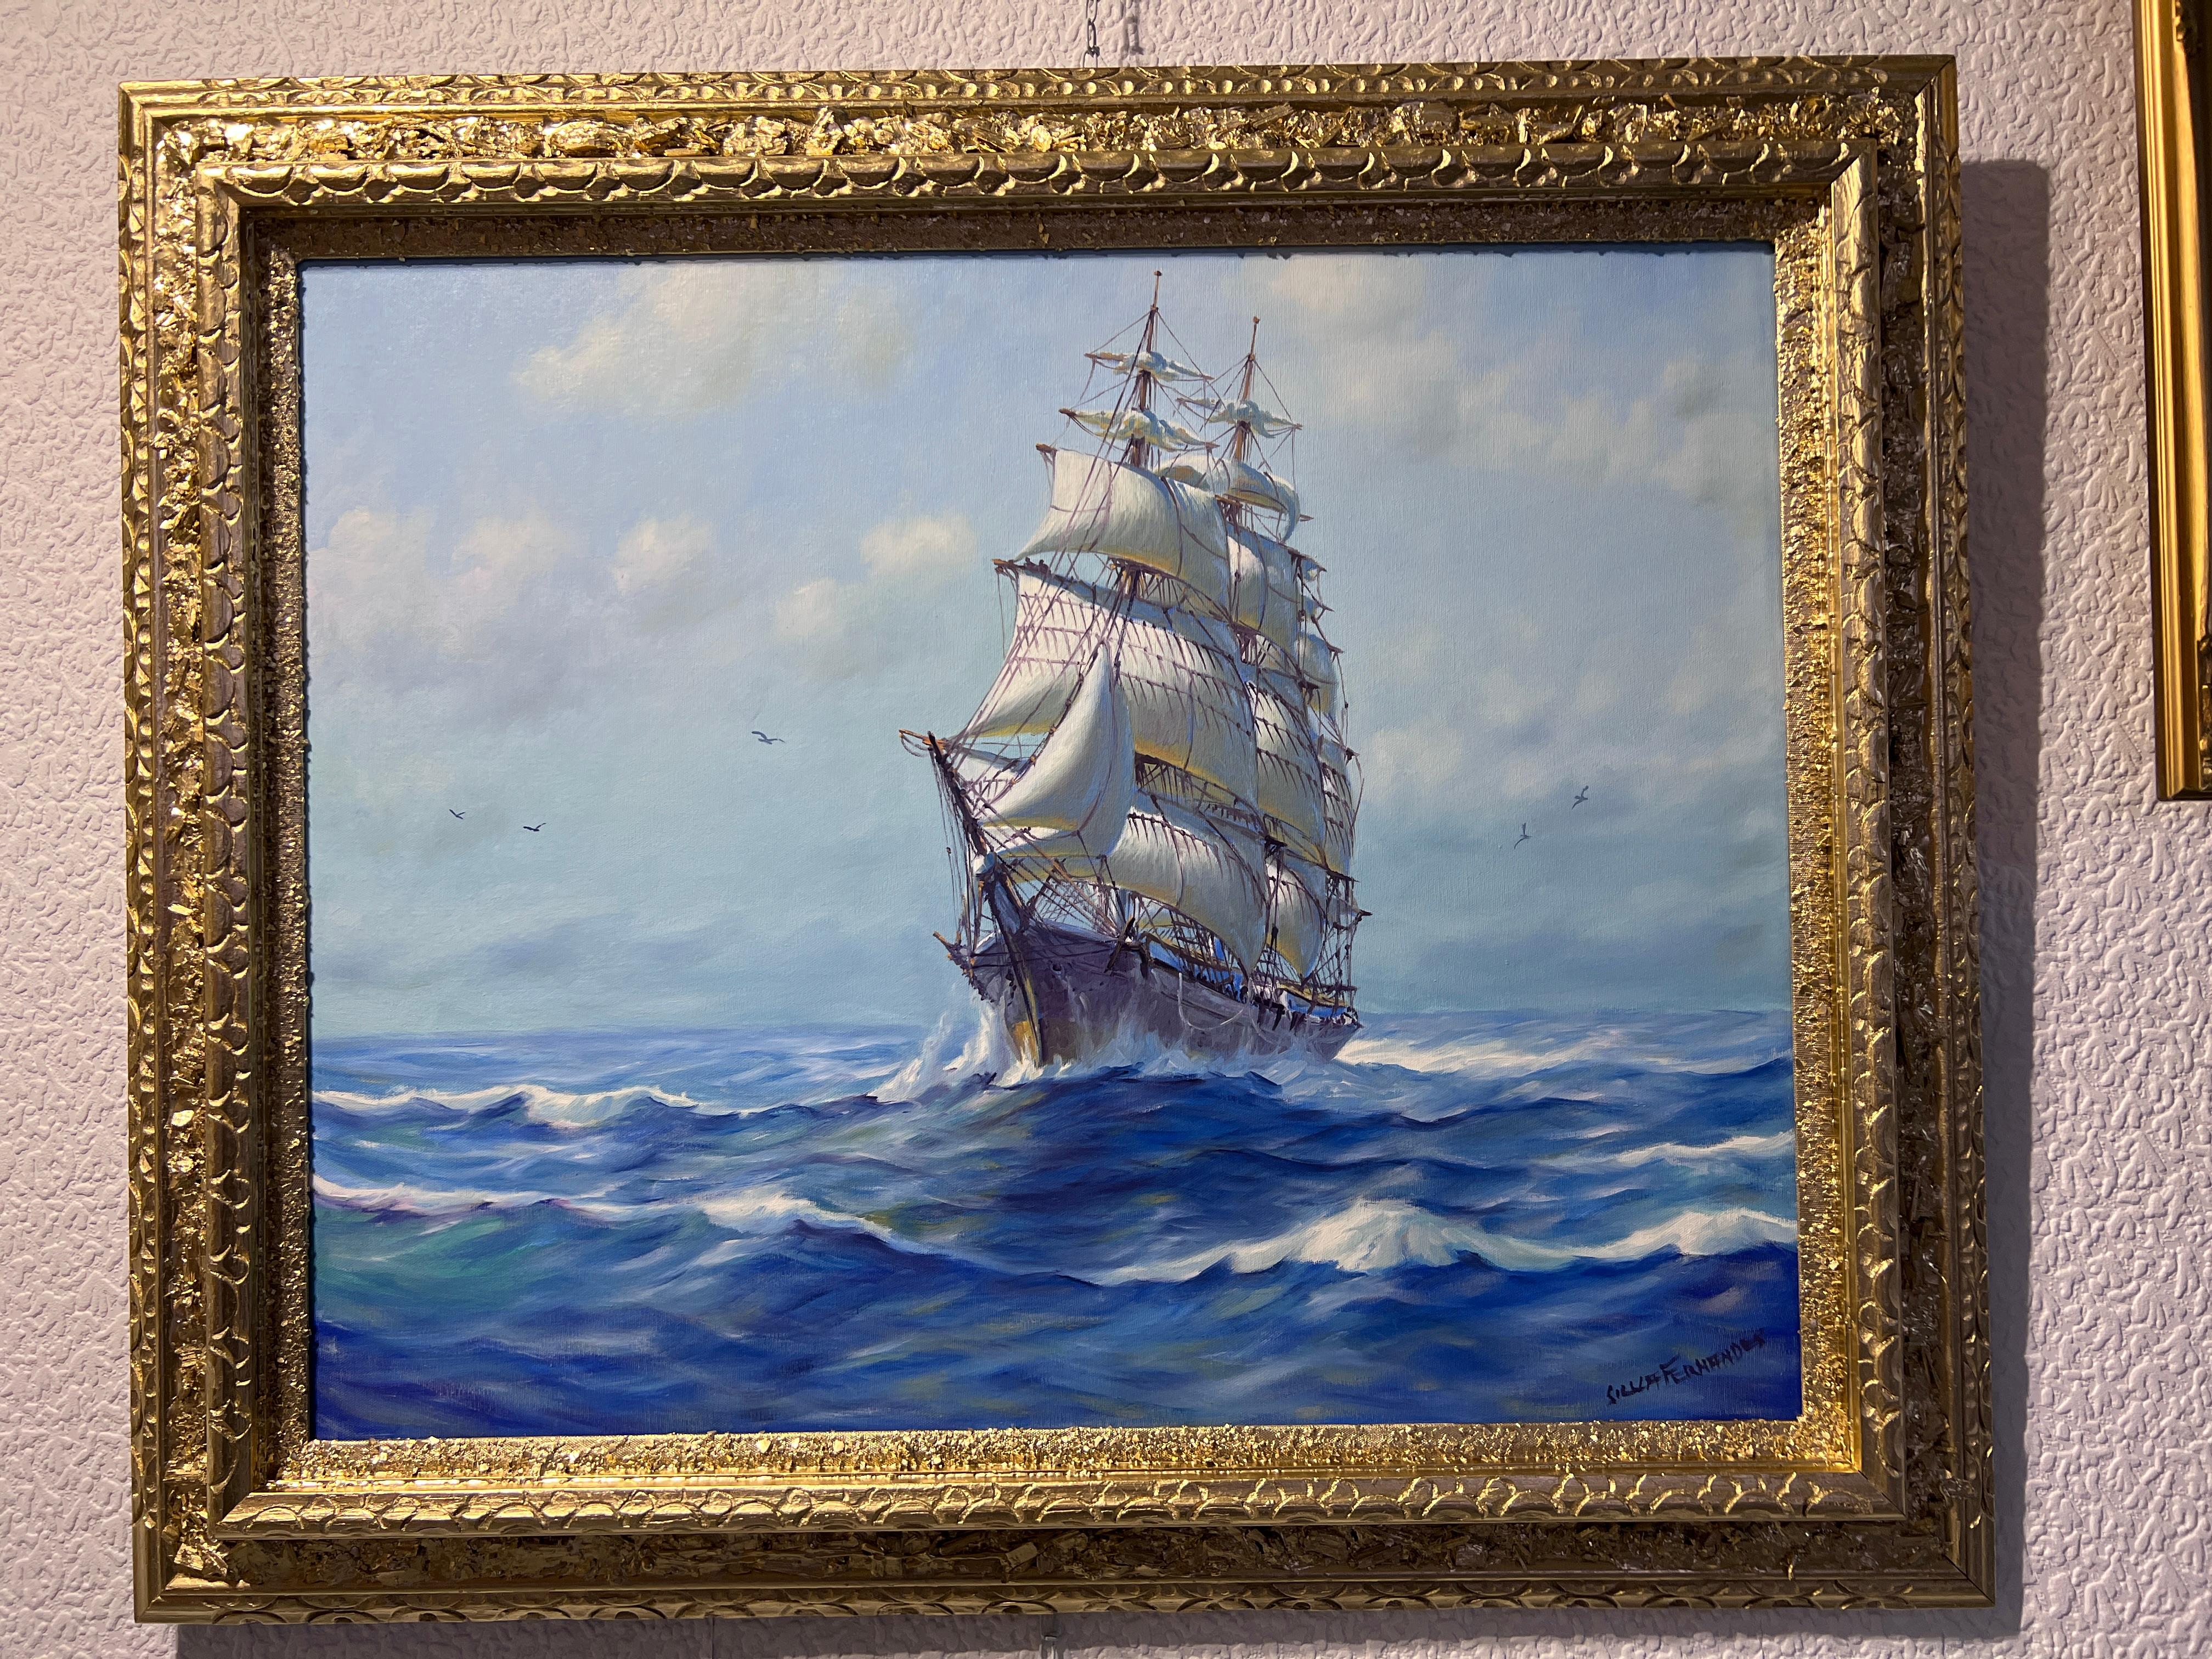 This is an amazing original oil painting on canvas of the famous Brazilian-American Artist, Humberto da Silva Fernandes (1937-2005) depicting a Clipper Ship under Full Sail. The sea surrounds the ship with gentle waves lapping against the hull,  and